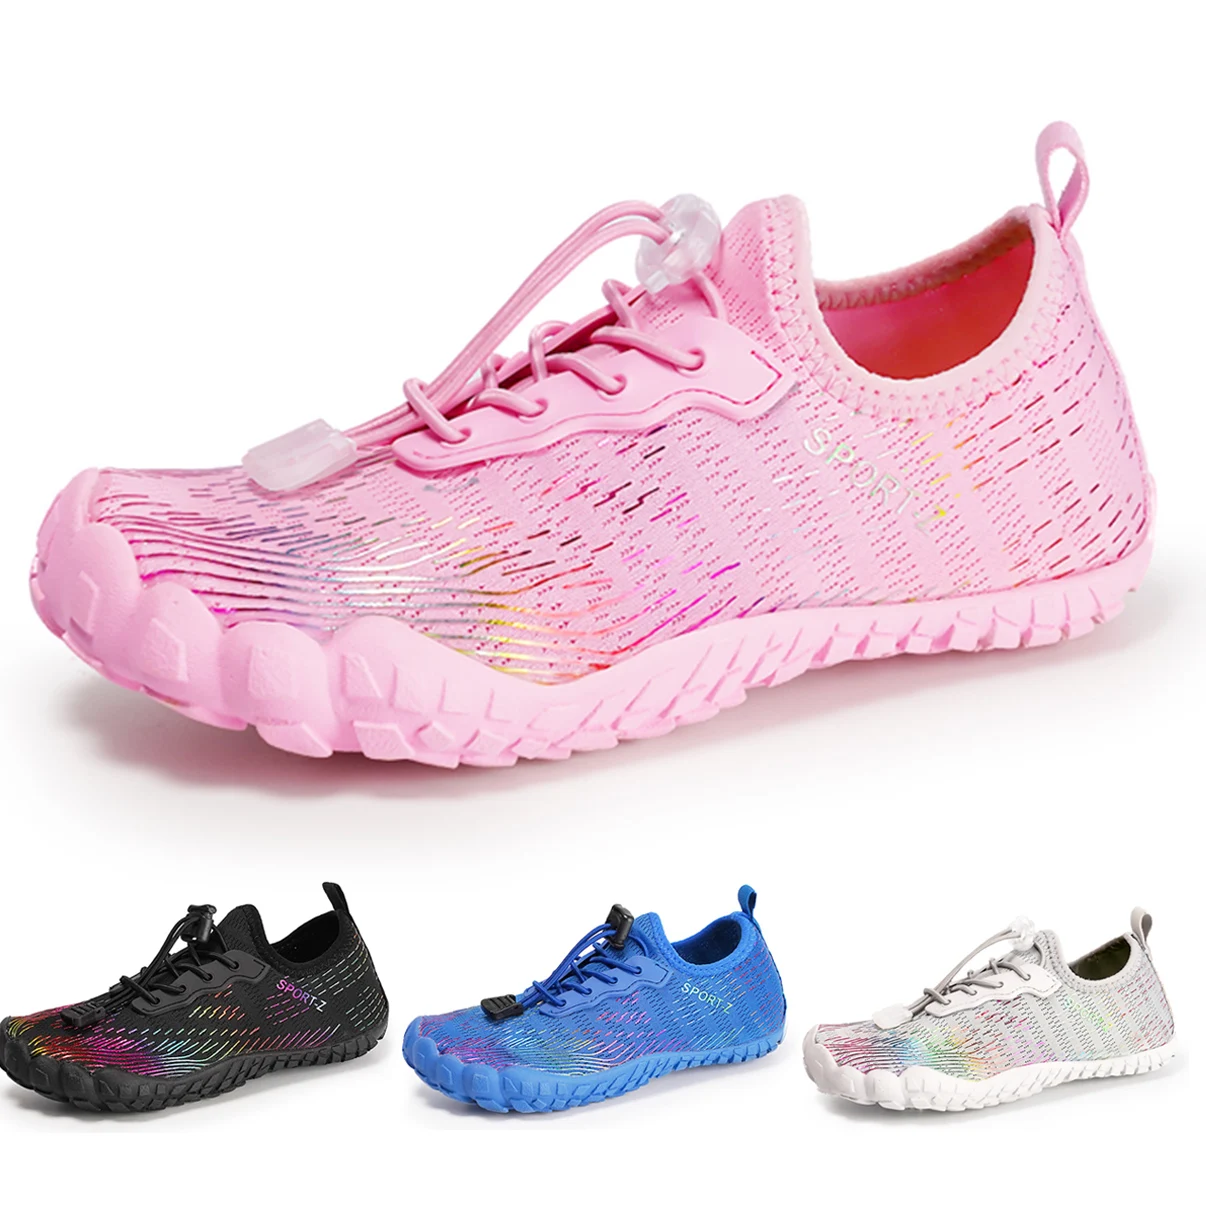 Aqua shoes Fashion wading beach shoes Children quick-drying swimming shoes Boys and girls water shoes Colorful sports shoes